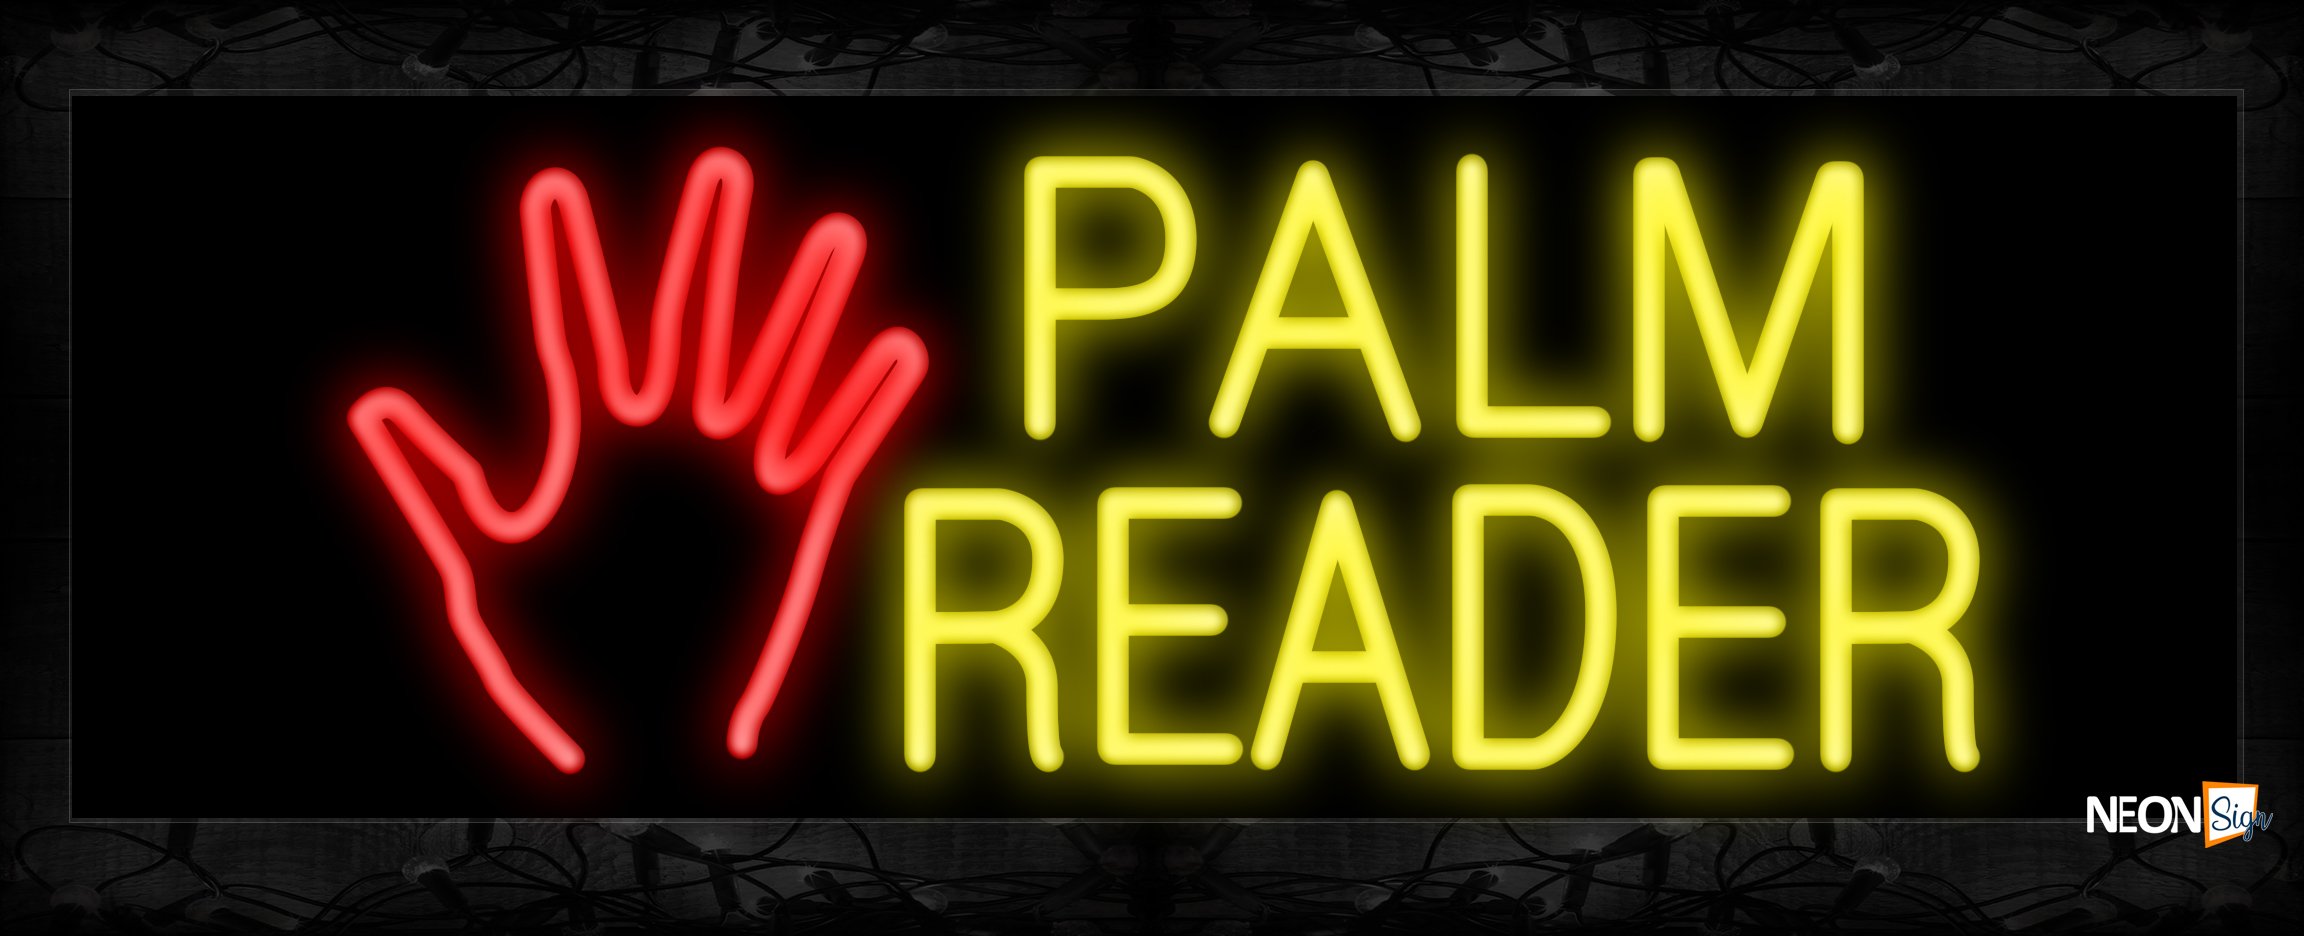 Image of 10104 Palm Reader with palm logo Neon Sign 13x32 Black Backing